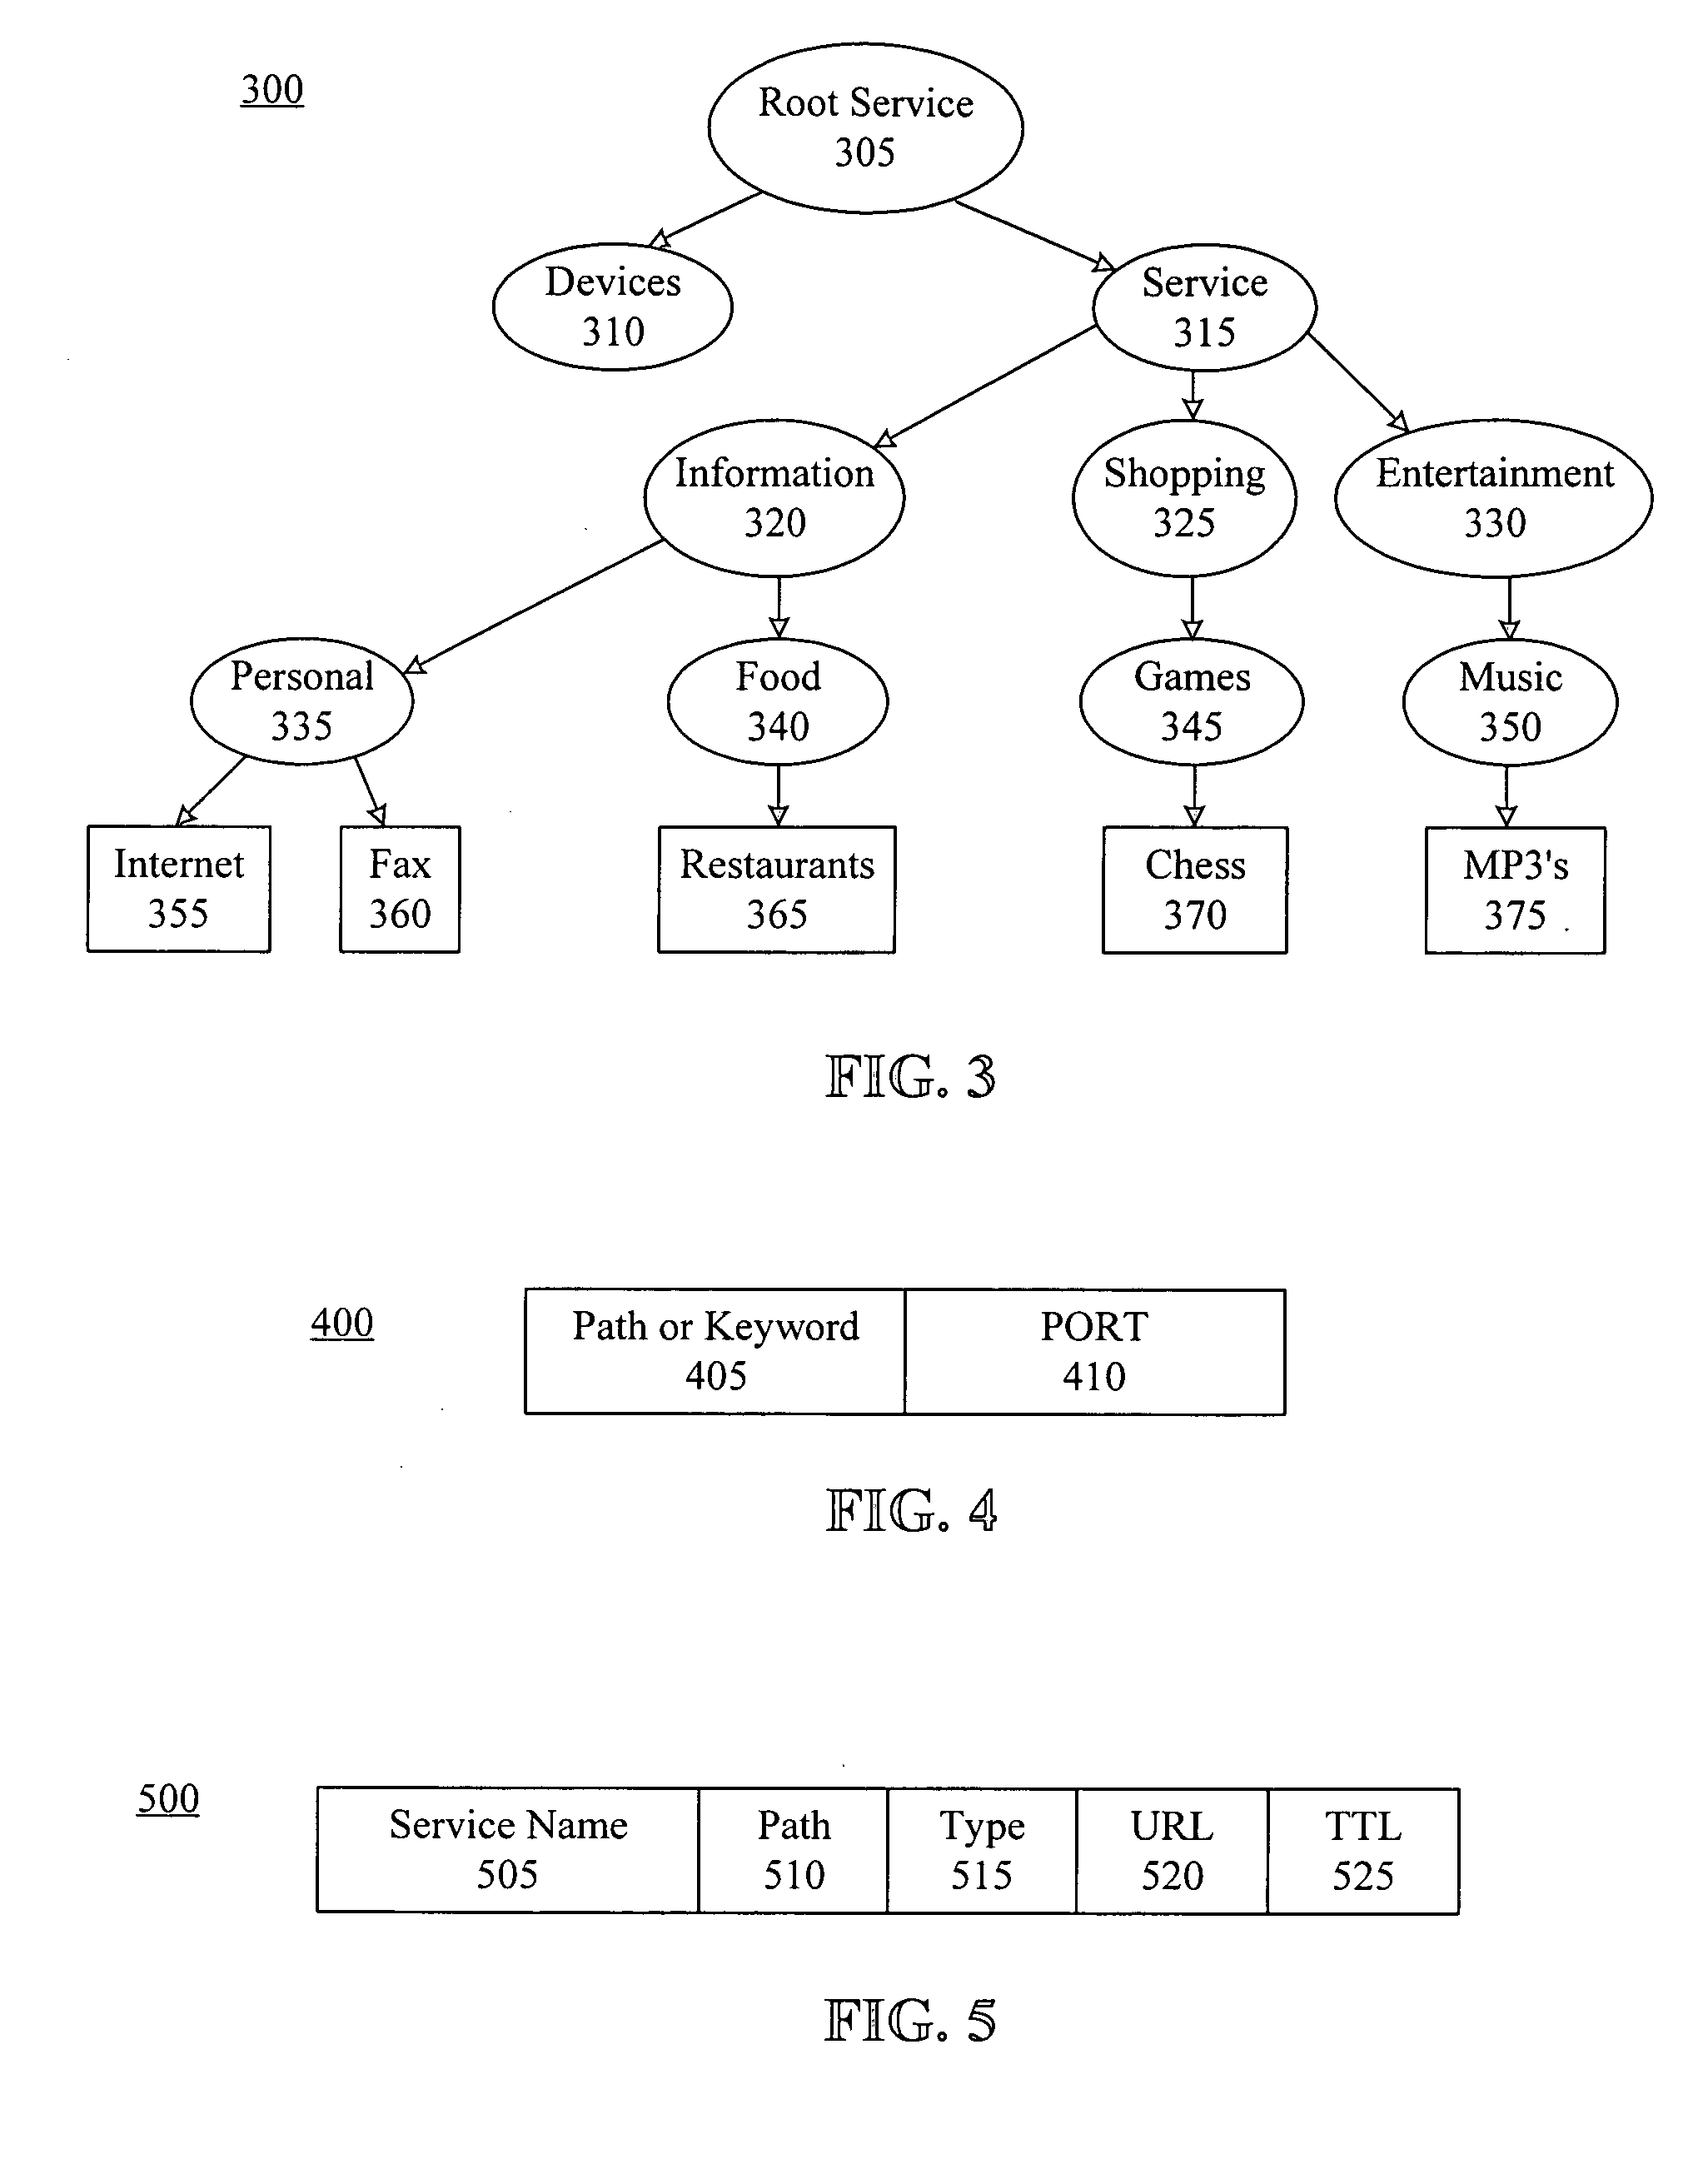 Service discovery and delivery for ad-hoc networks